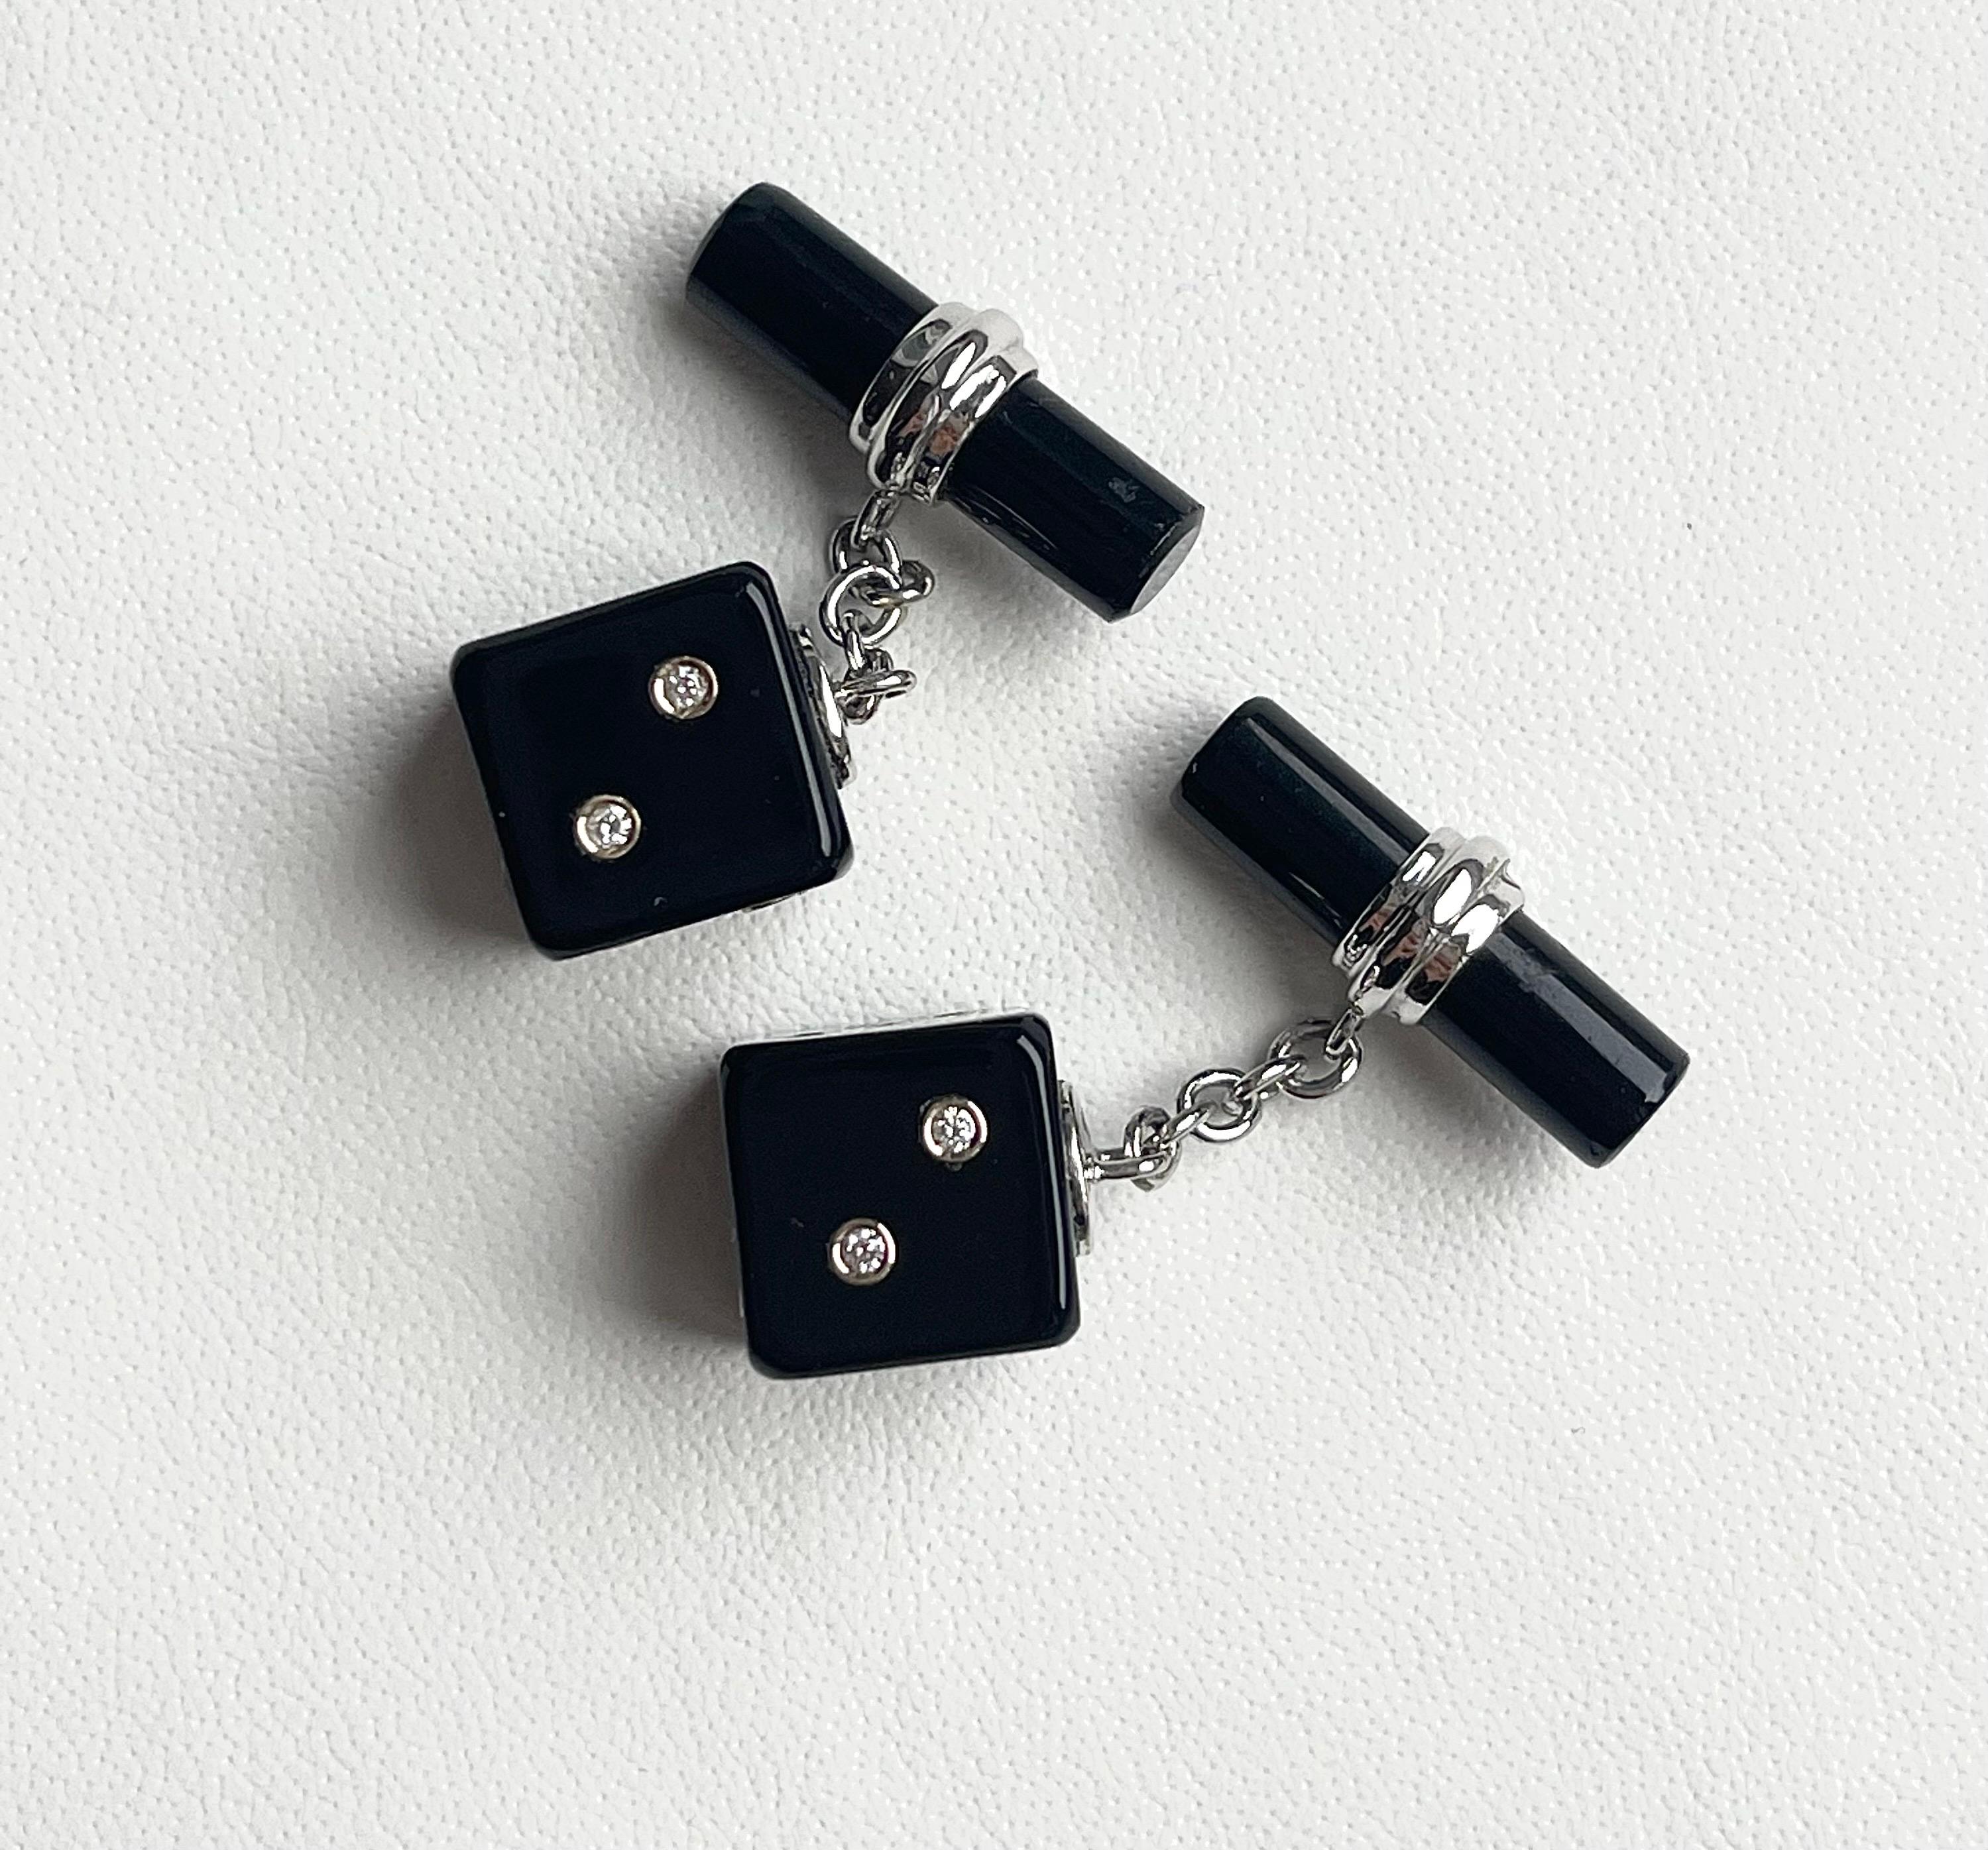 This sophisticated pair of cufflinks is entirely made of onyx and it features a simple, cylindrical toggle attached to the front with an 18k white gold post.        
The front face is shaped as a cube with its striking black surface highlighted by